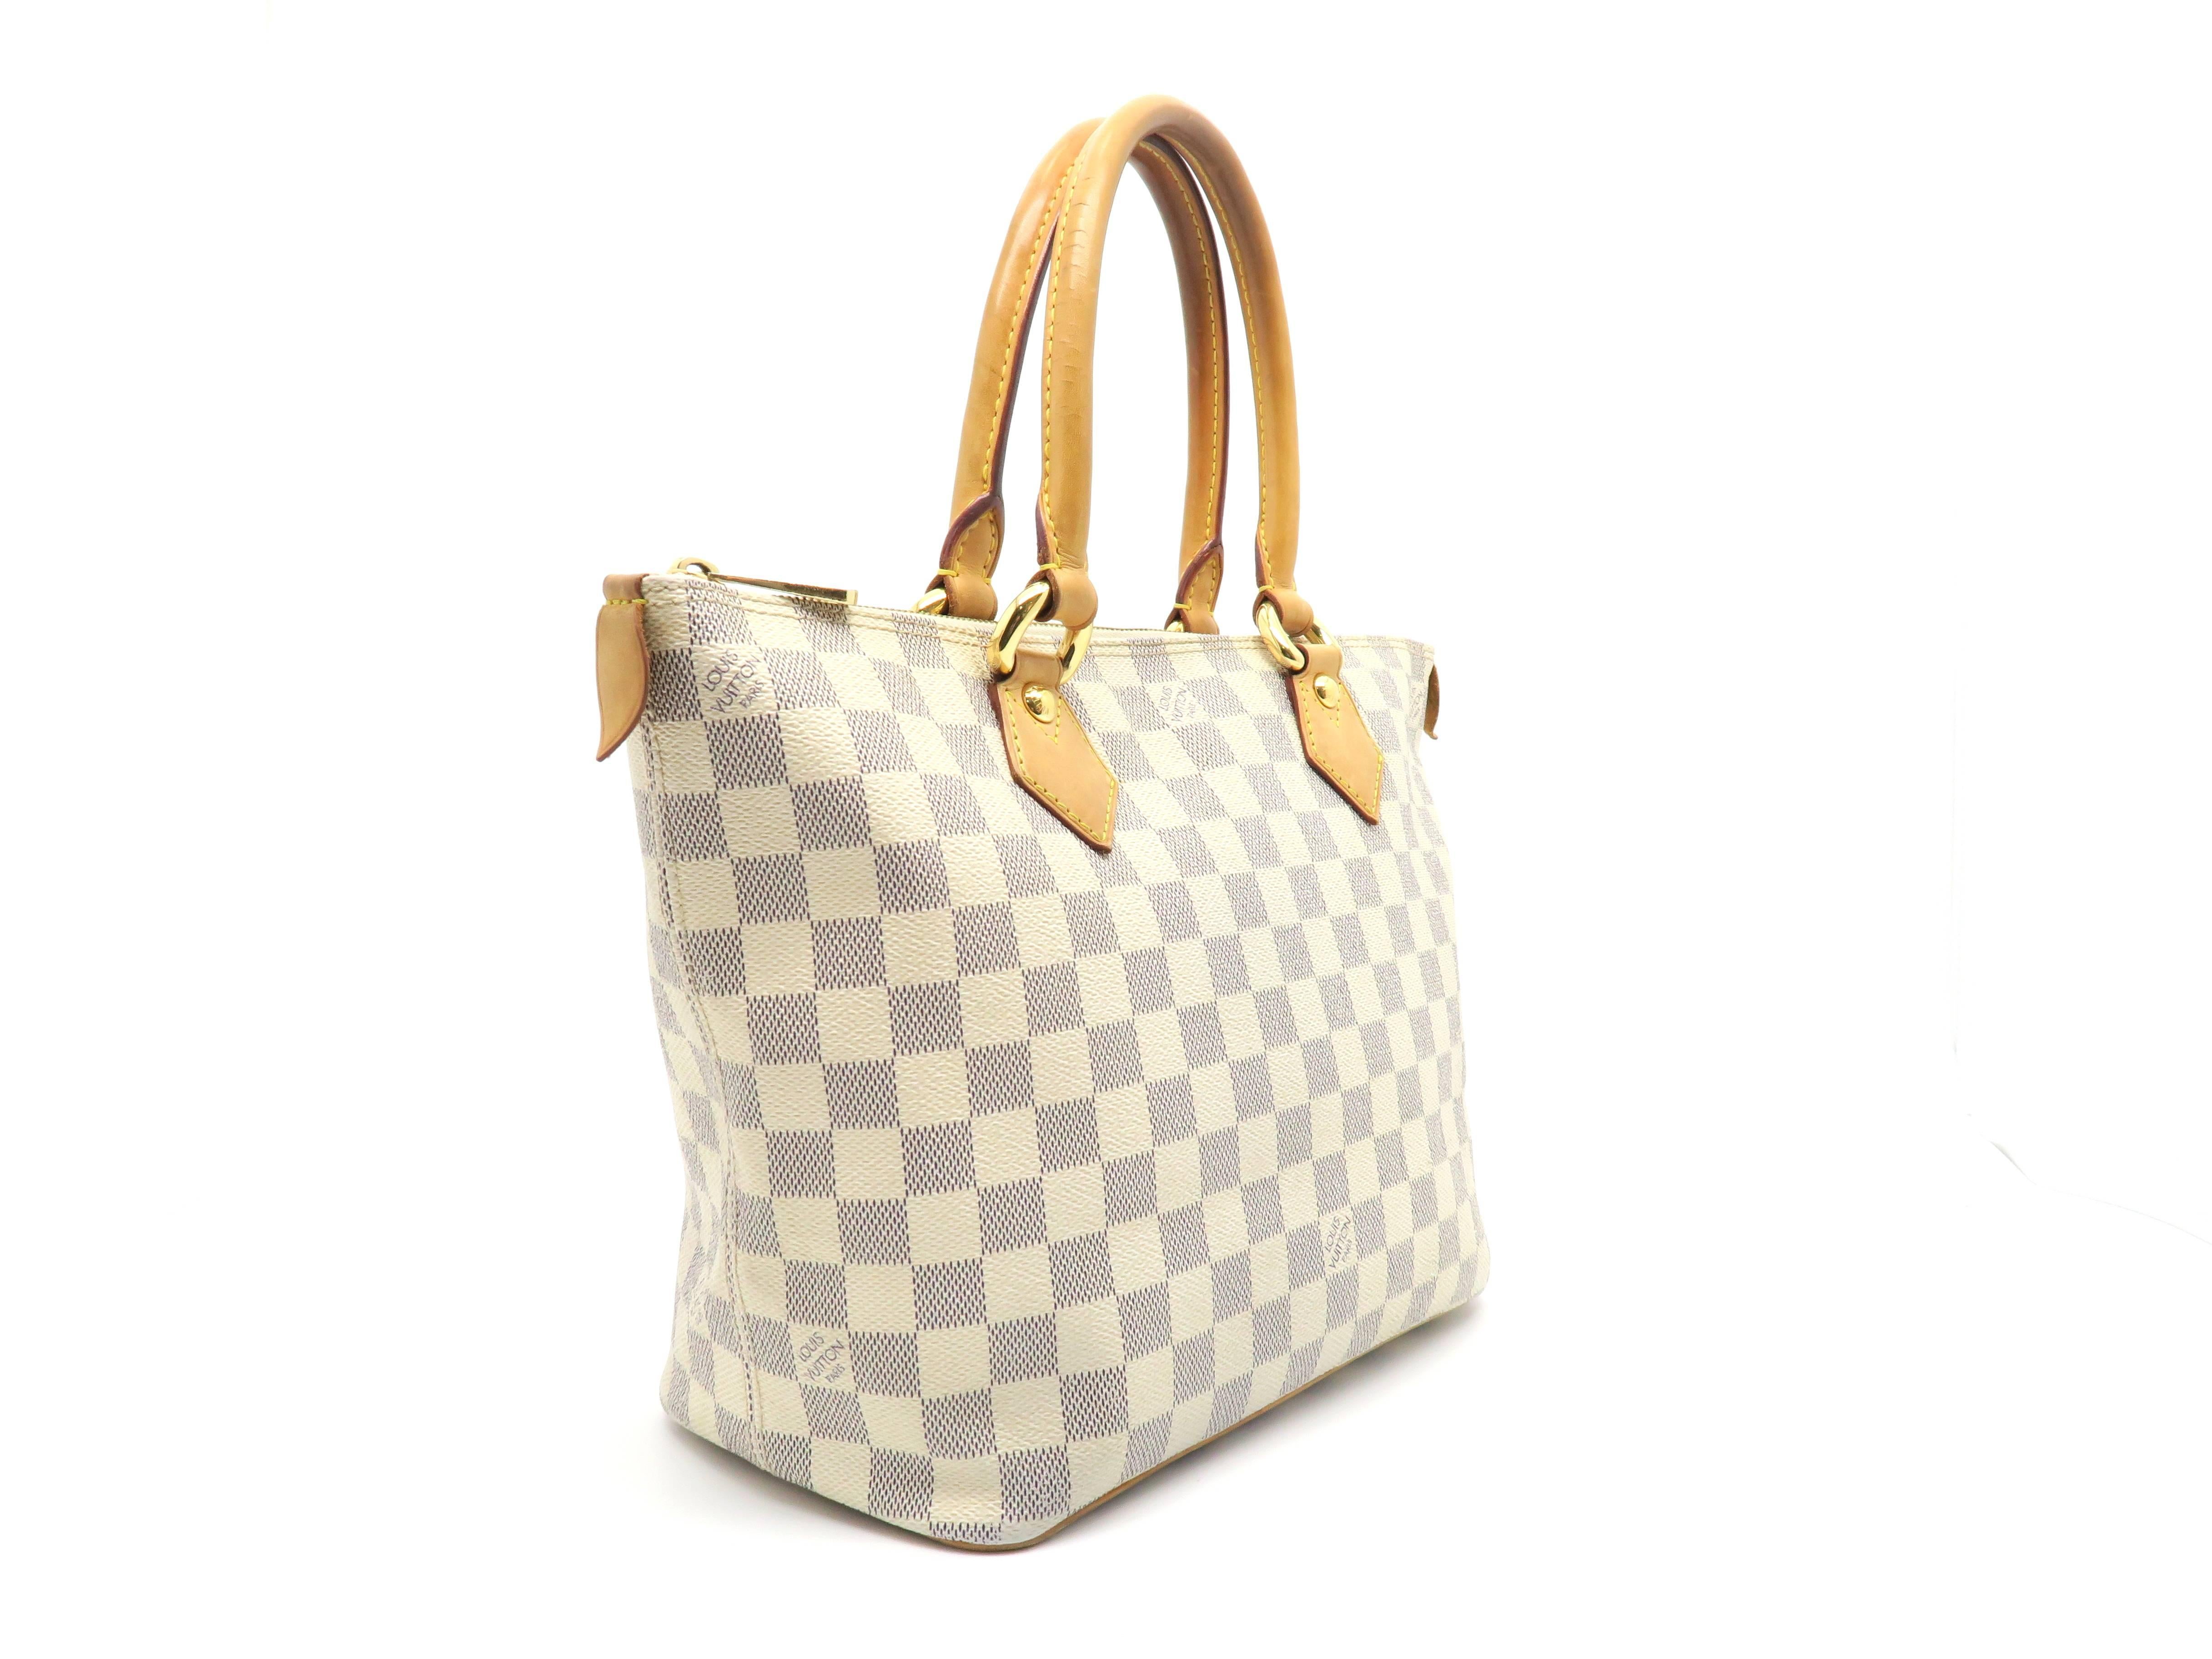 Color: White

Material: Damier Azur

Condition: Rank A
Overall: Good, few minor defects
Surface: Minor Scratches
Corners: Minor Scratches
Edges: Minor Scratches
Handles/Straps: Minor Scratches 
Hardware: Minor Scratches

Dimension: W26 × H23 ×